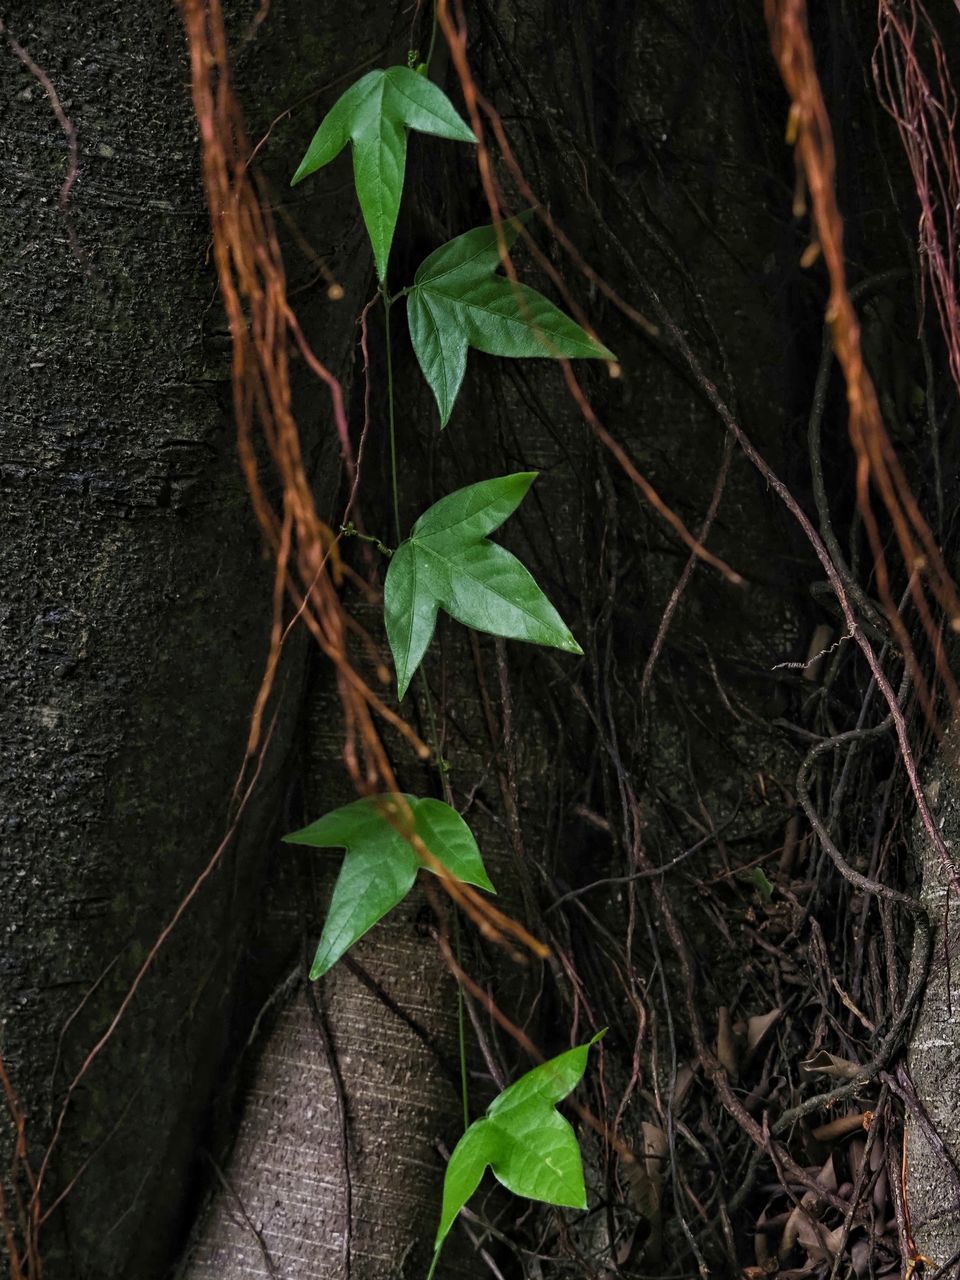 CLOSE-UP OF LEAVES ON TREE TRUNK